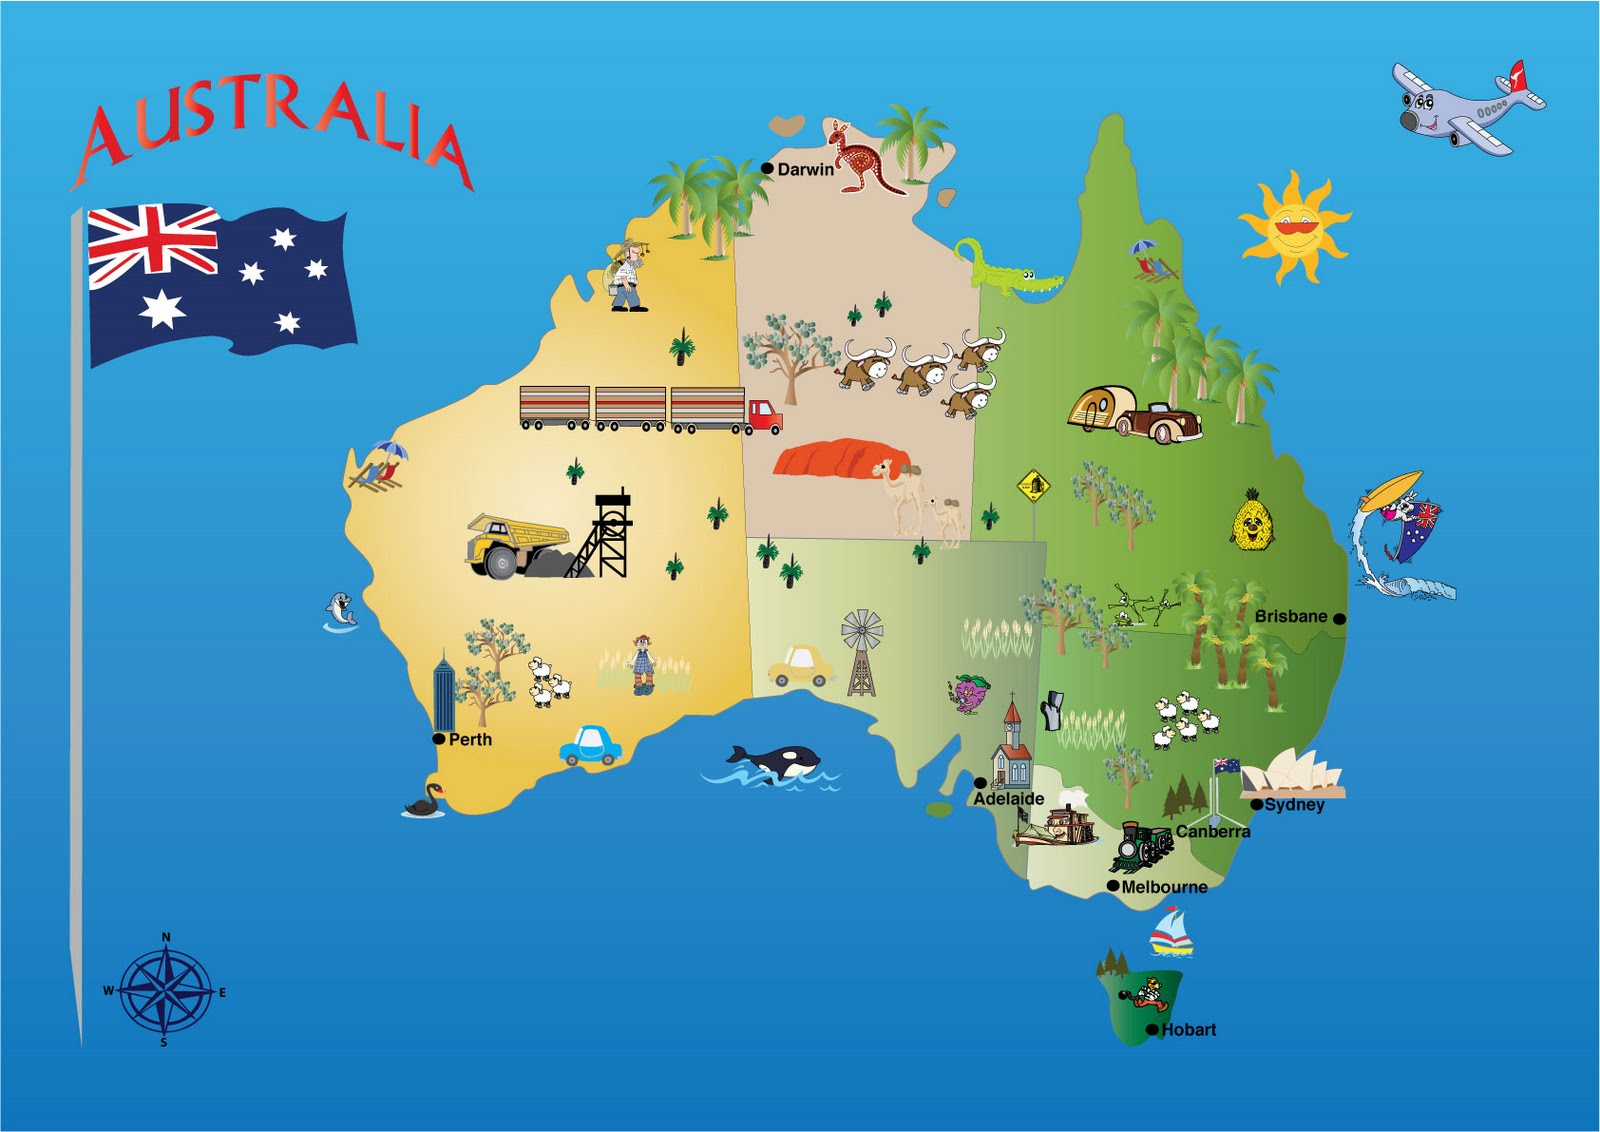 michelle-s-creative-blog-australia-map-for-kids-3-6-years-old